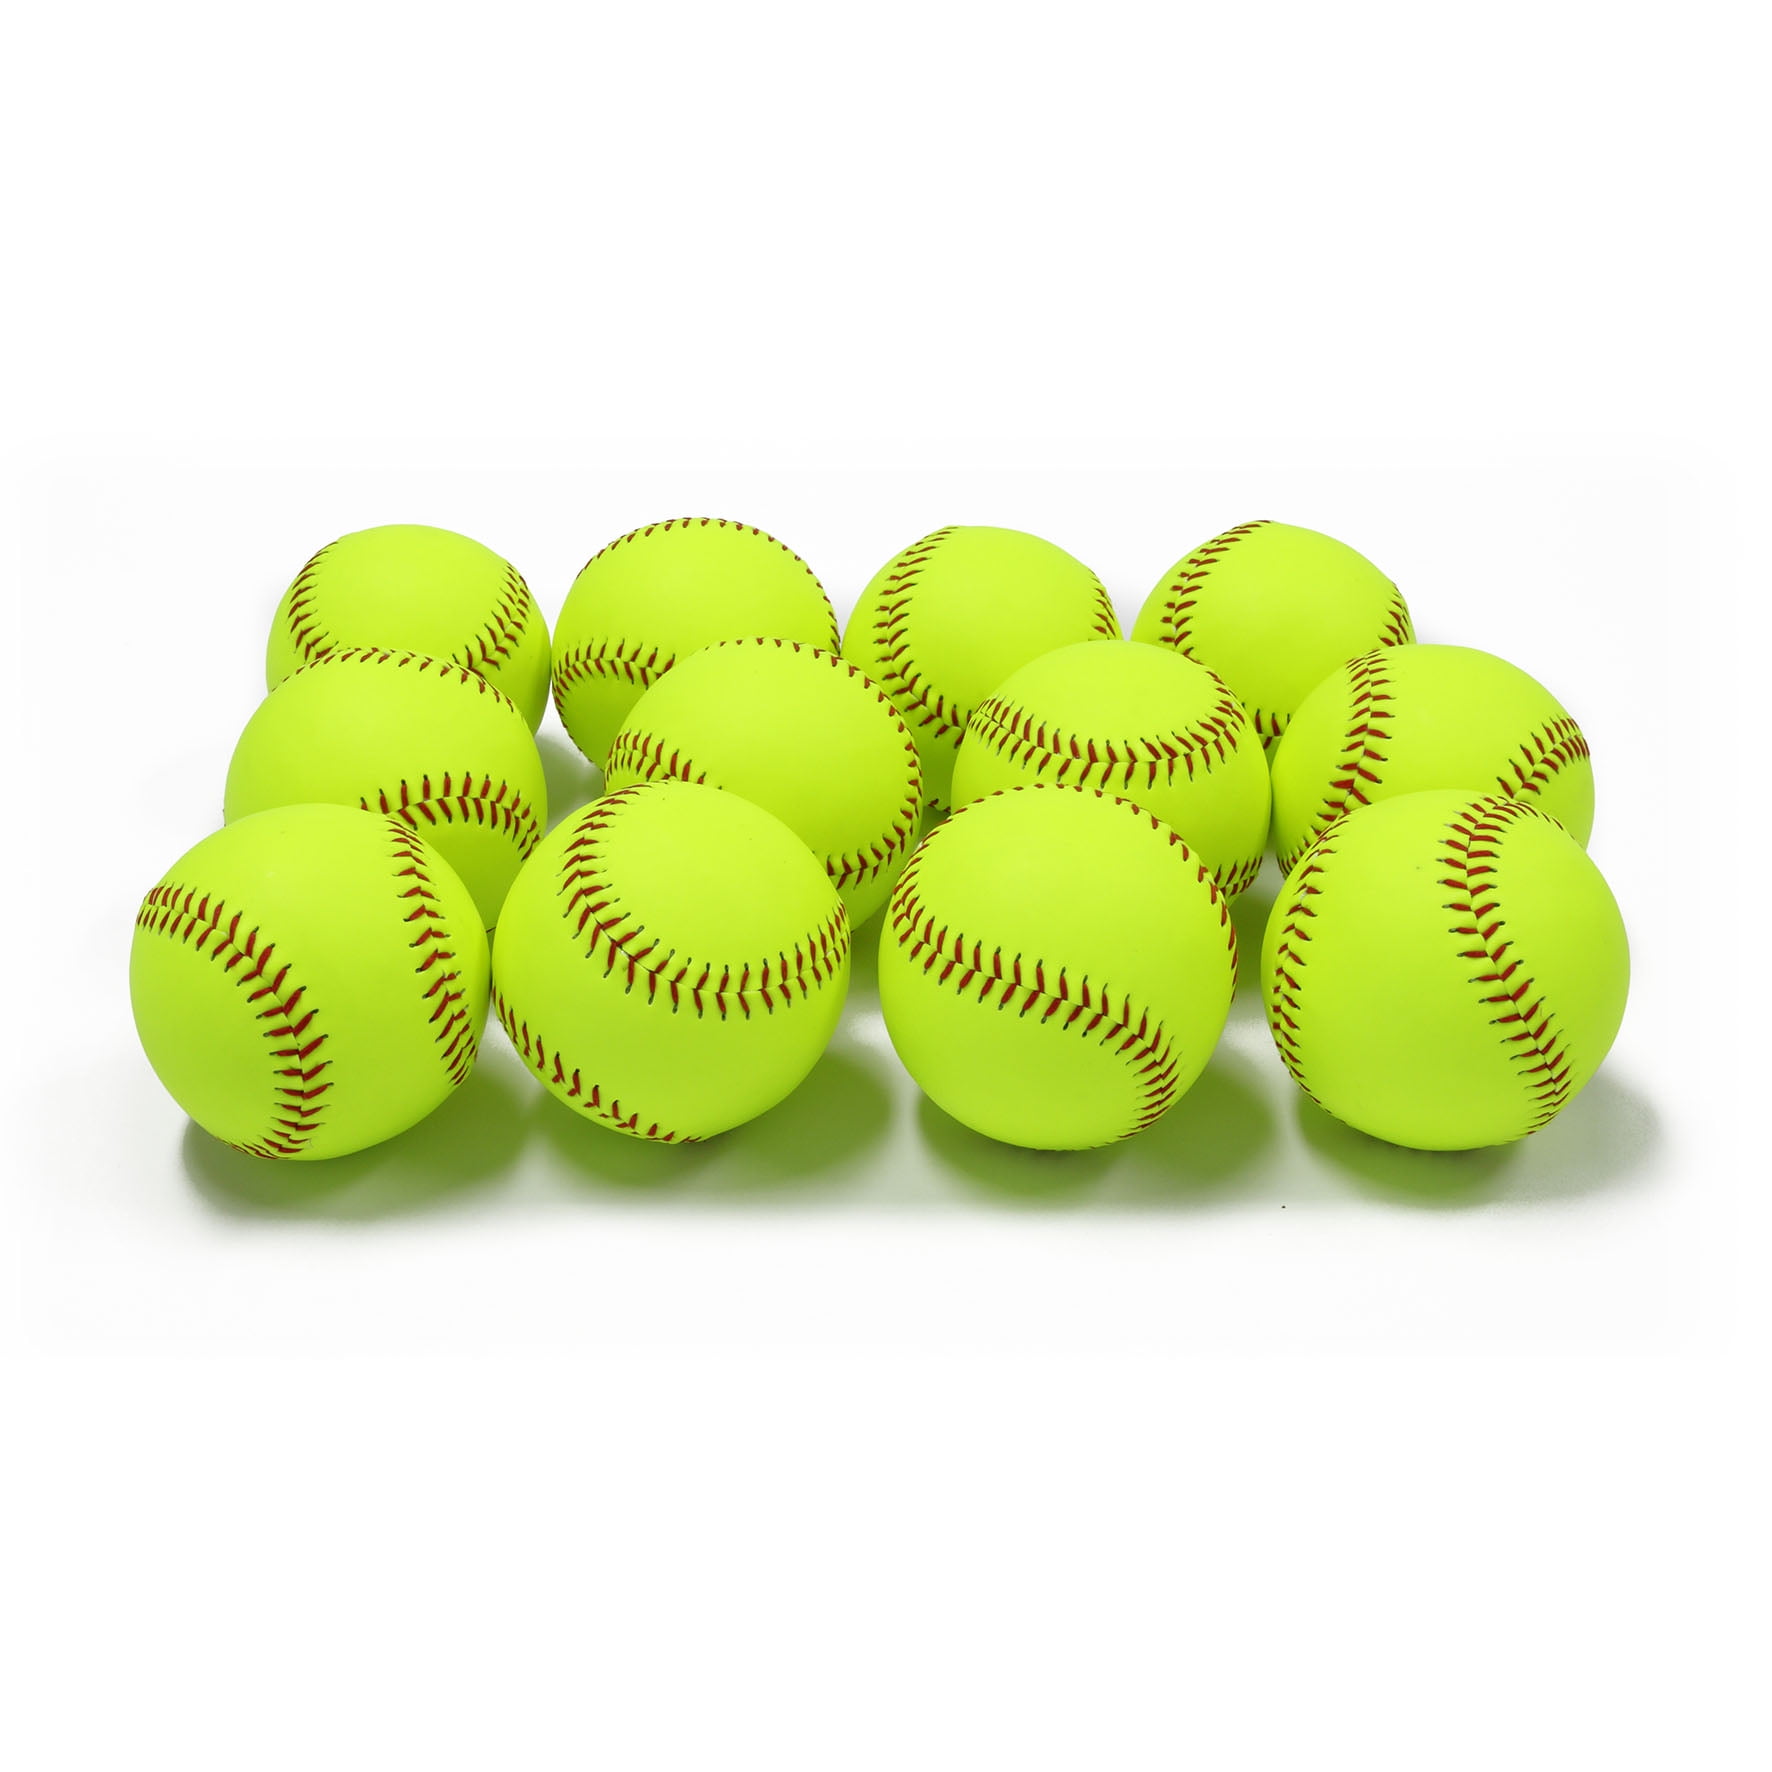 Lot Of 13 Practice Softballs Yellow And White One Is Soft Material